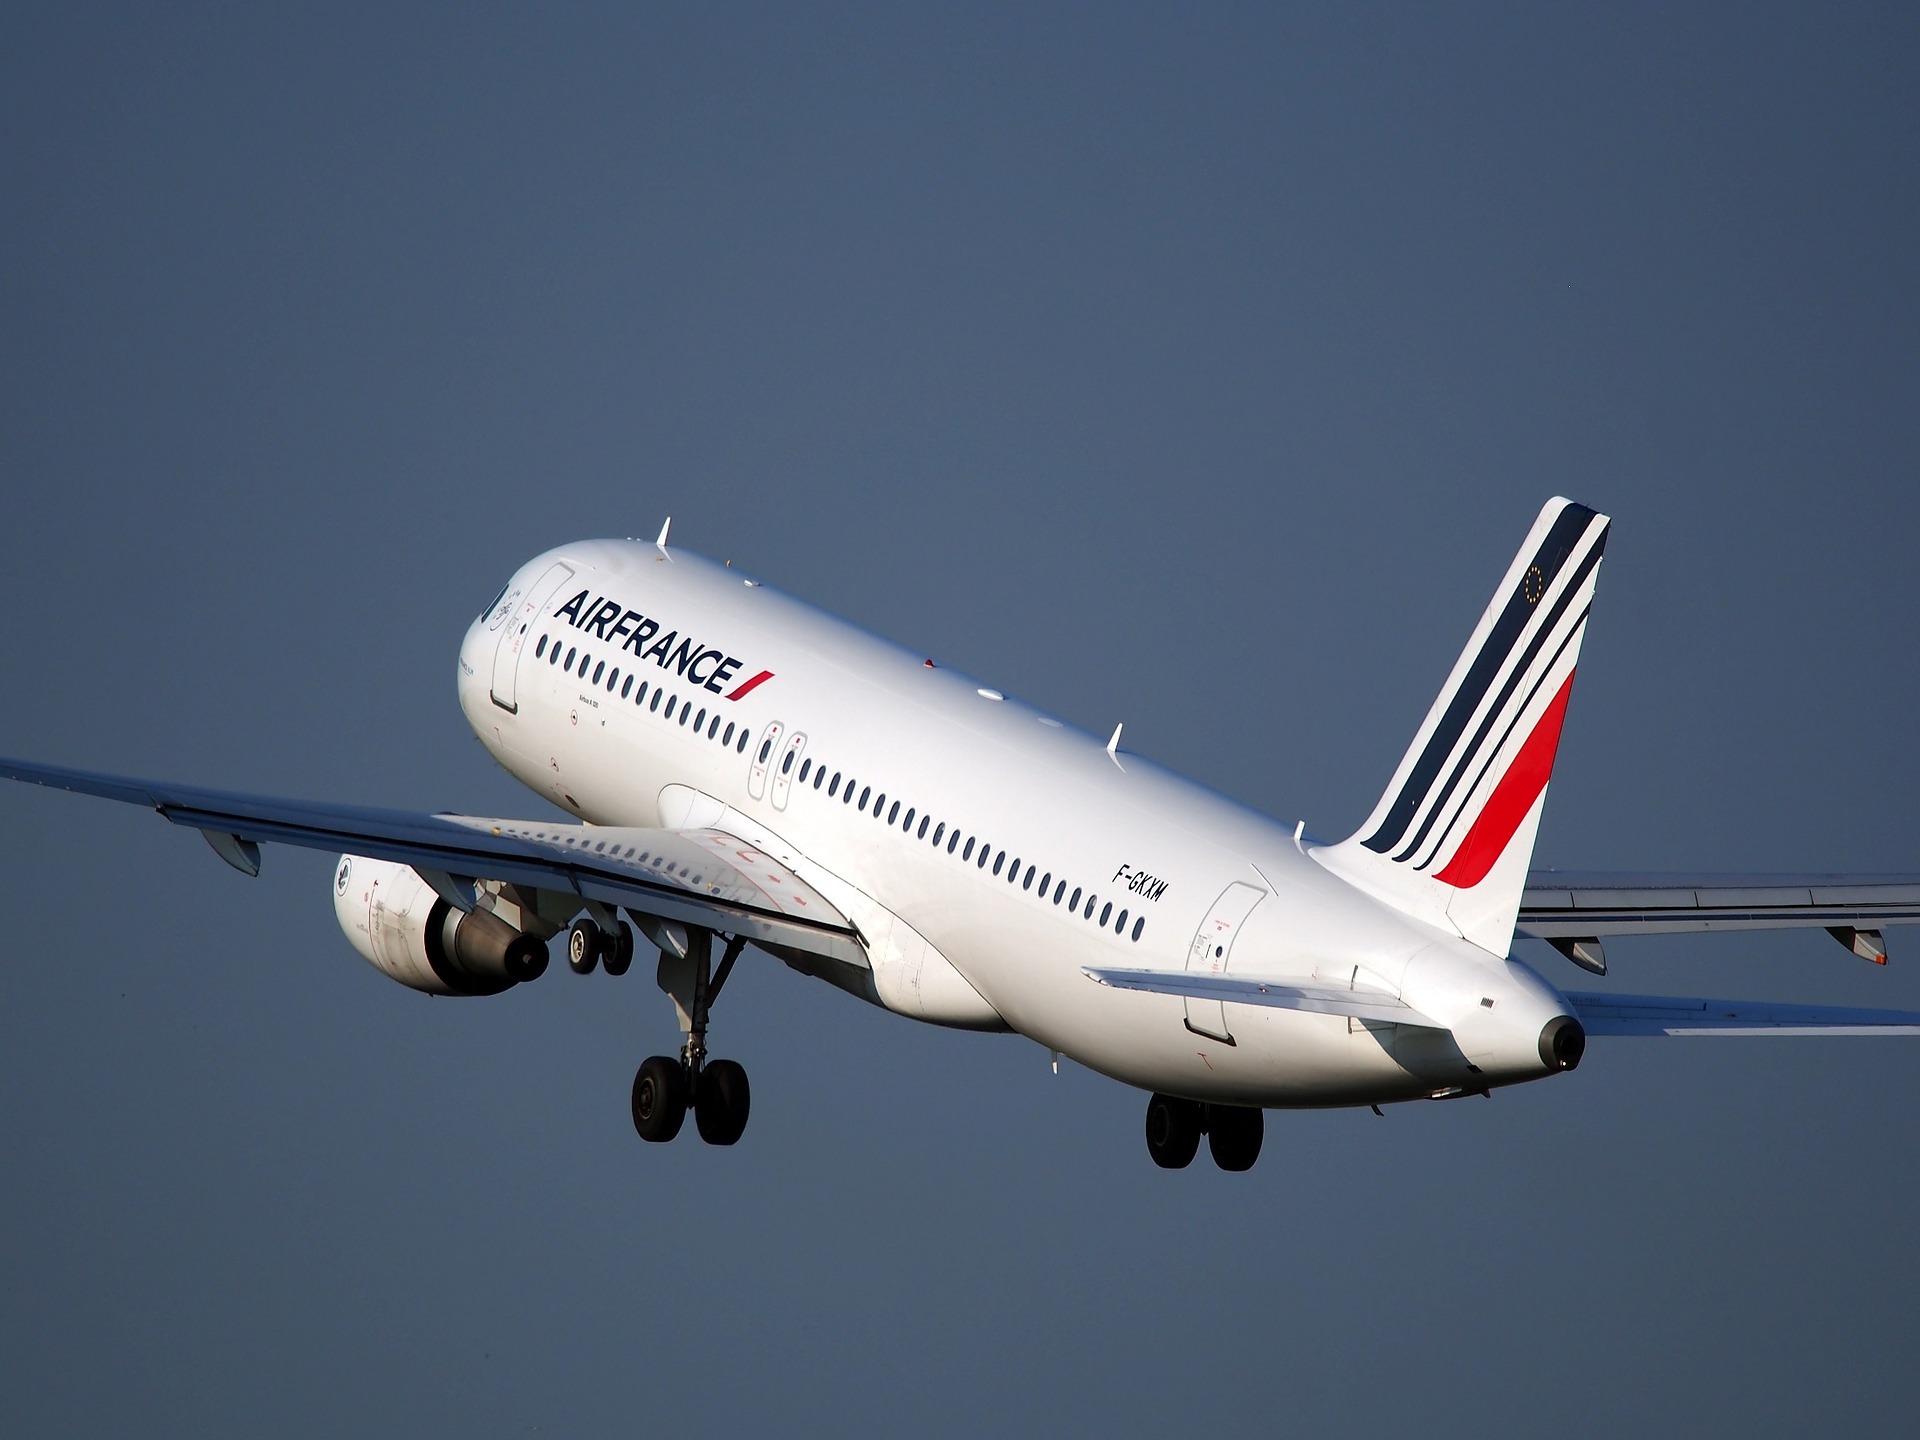 Do babies fly free? Not on Air France award tickets.